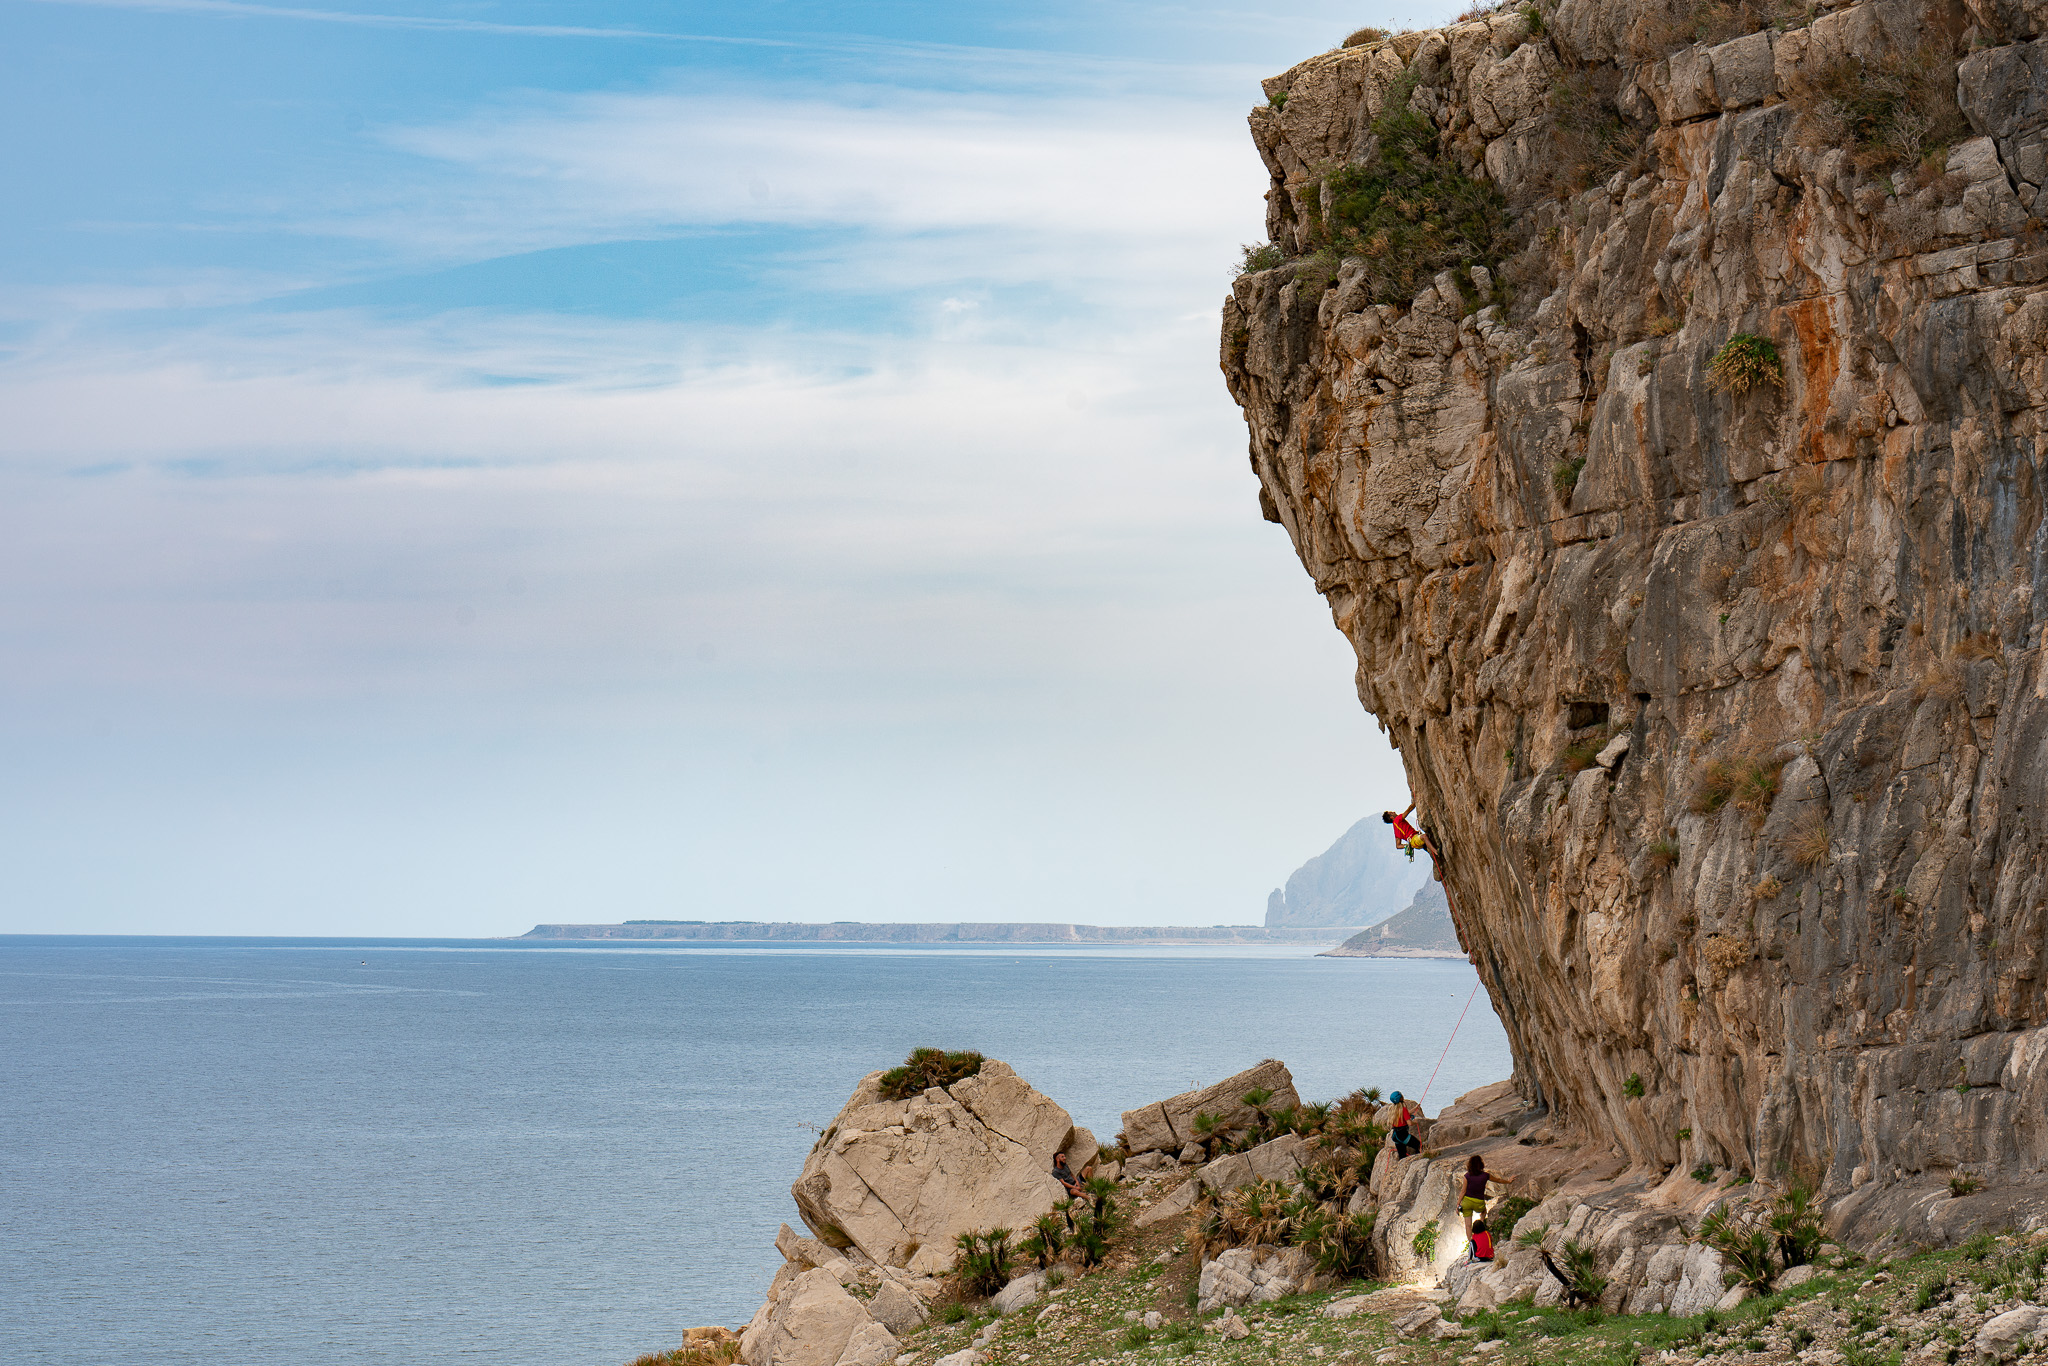 A climber on a cliff in Trapani, Western Sicily